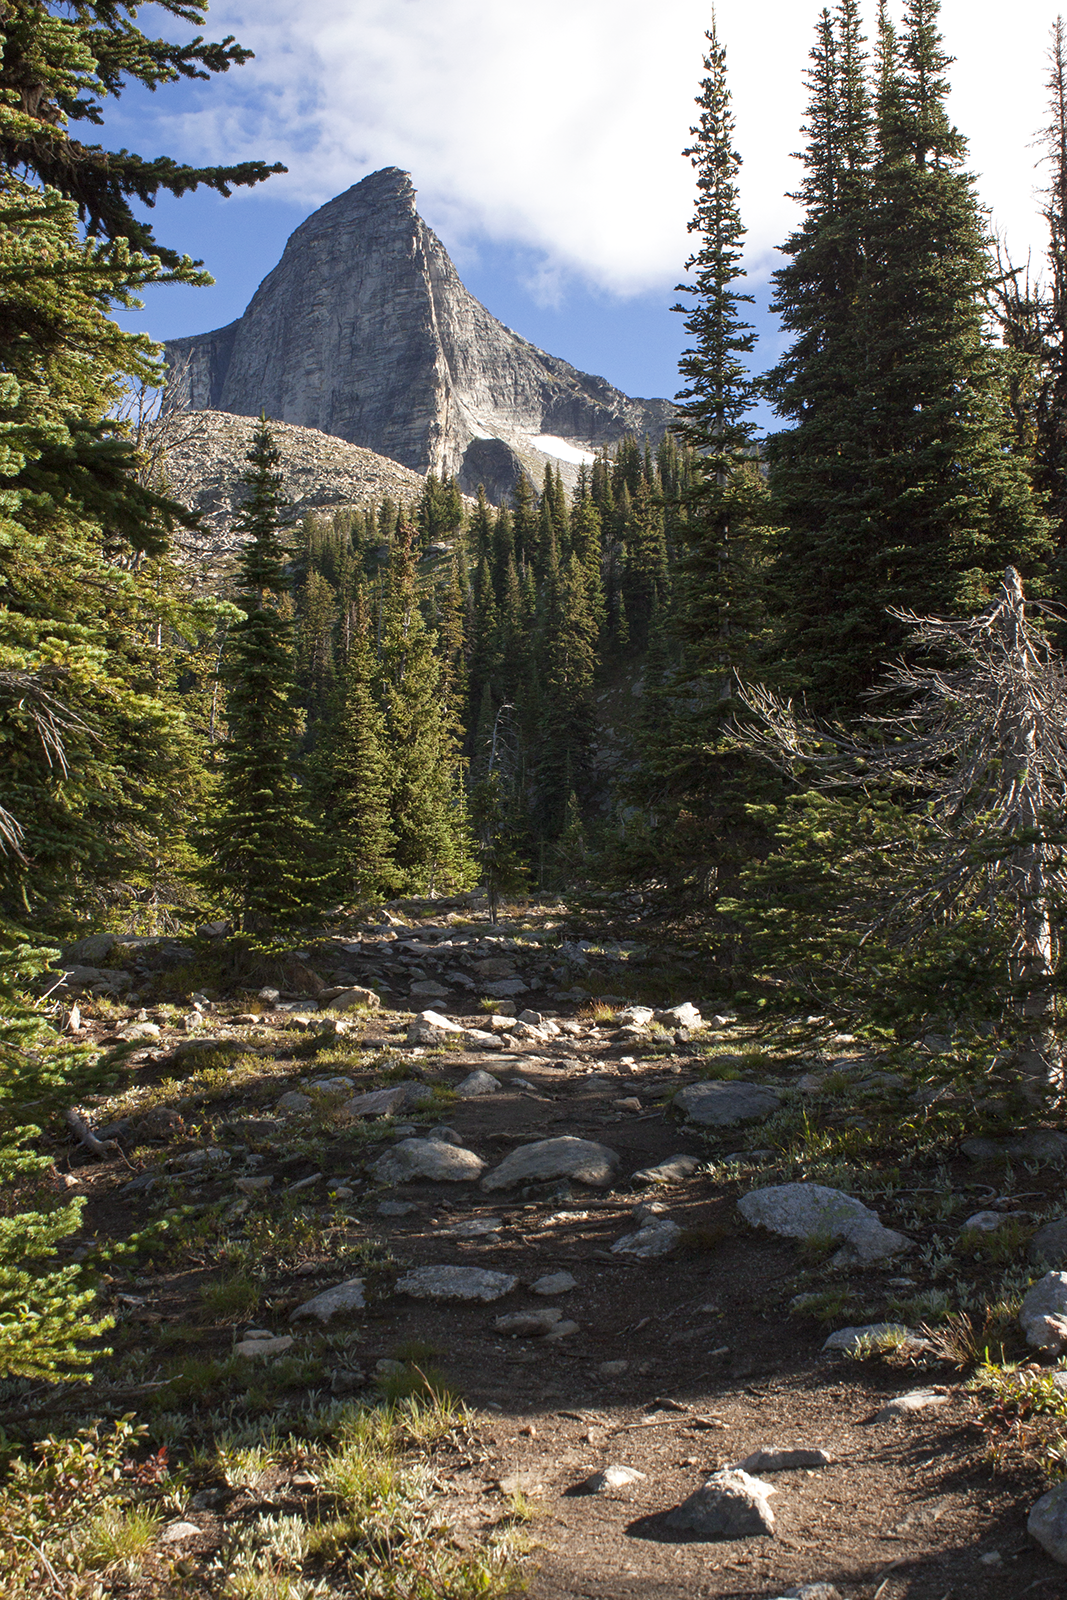 A rocky terrain leading to a large mountain.